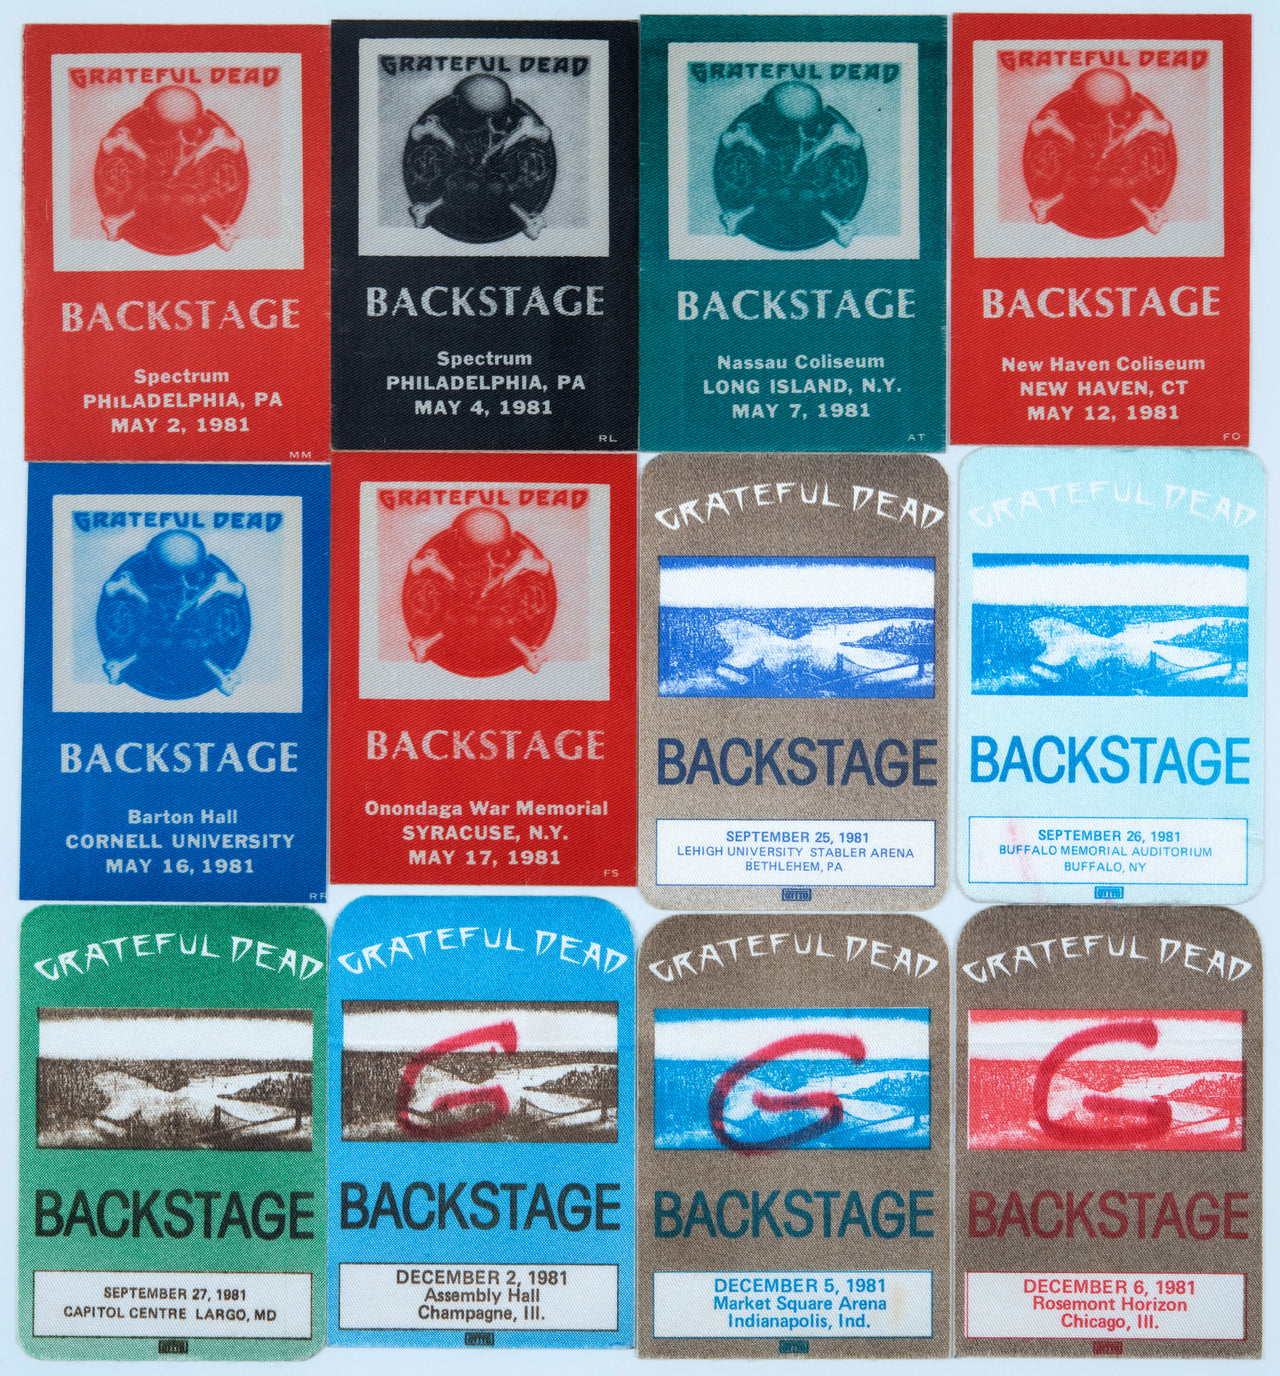 Grateful Dead Backstage Passes (5/2/1981 - 12/6/1981) from Dan Healy